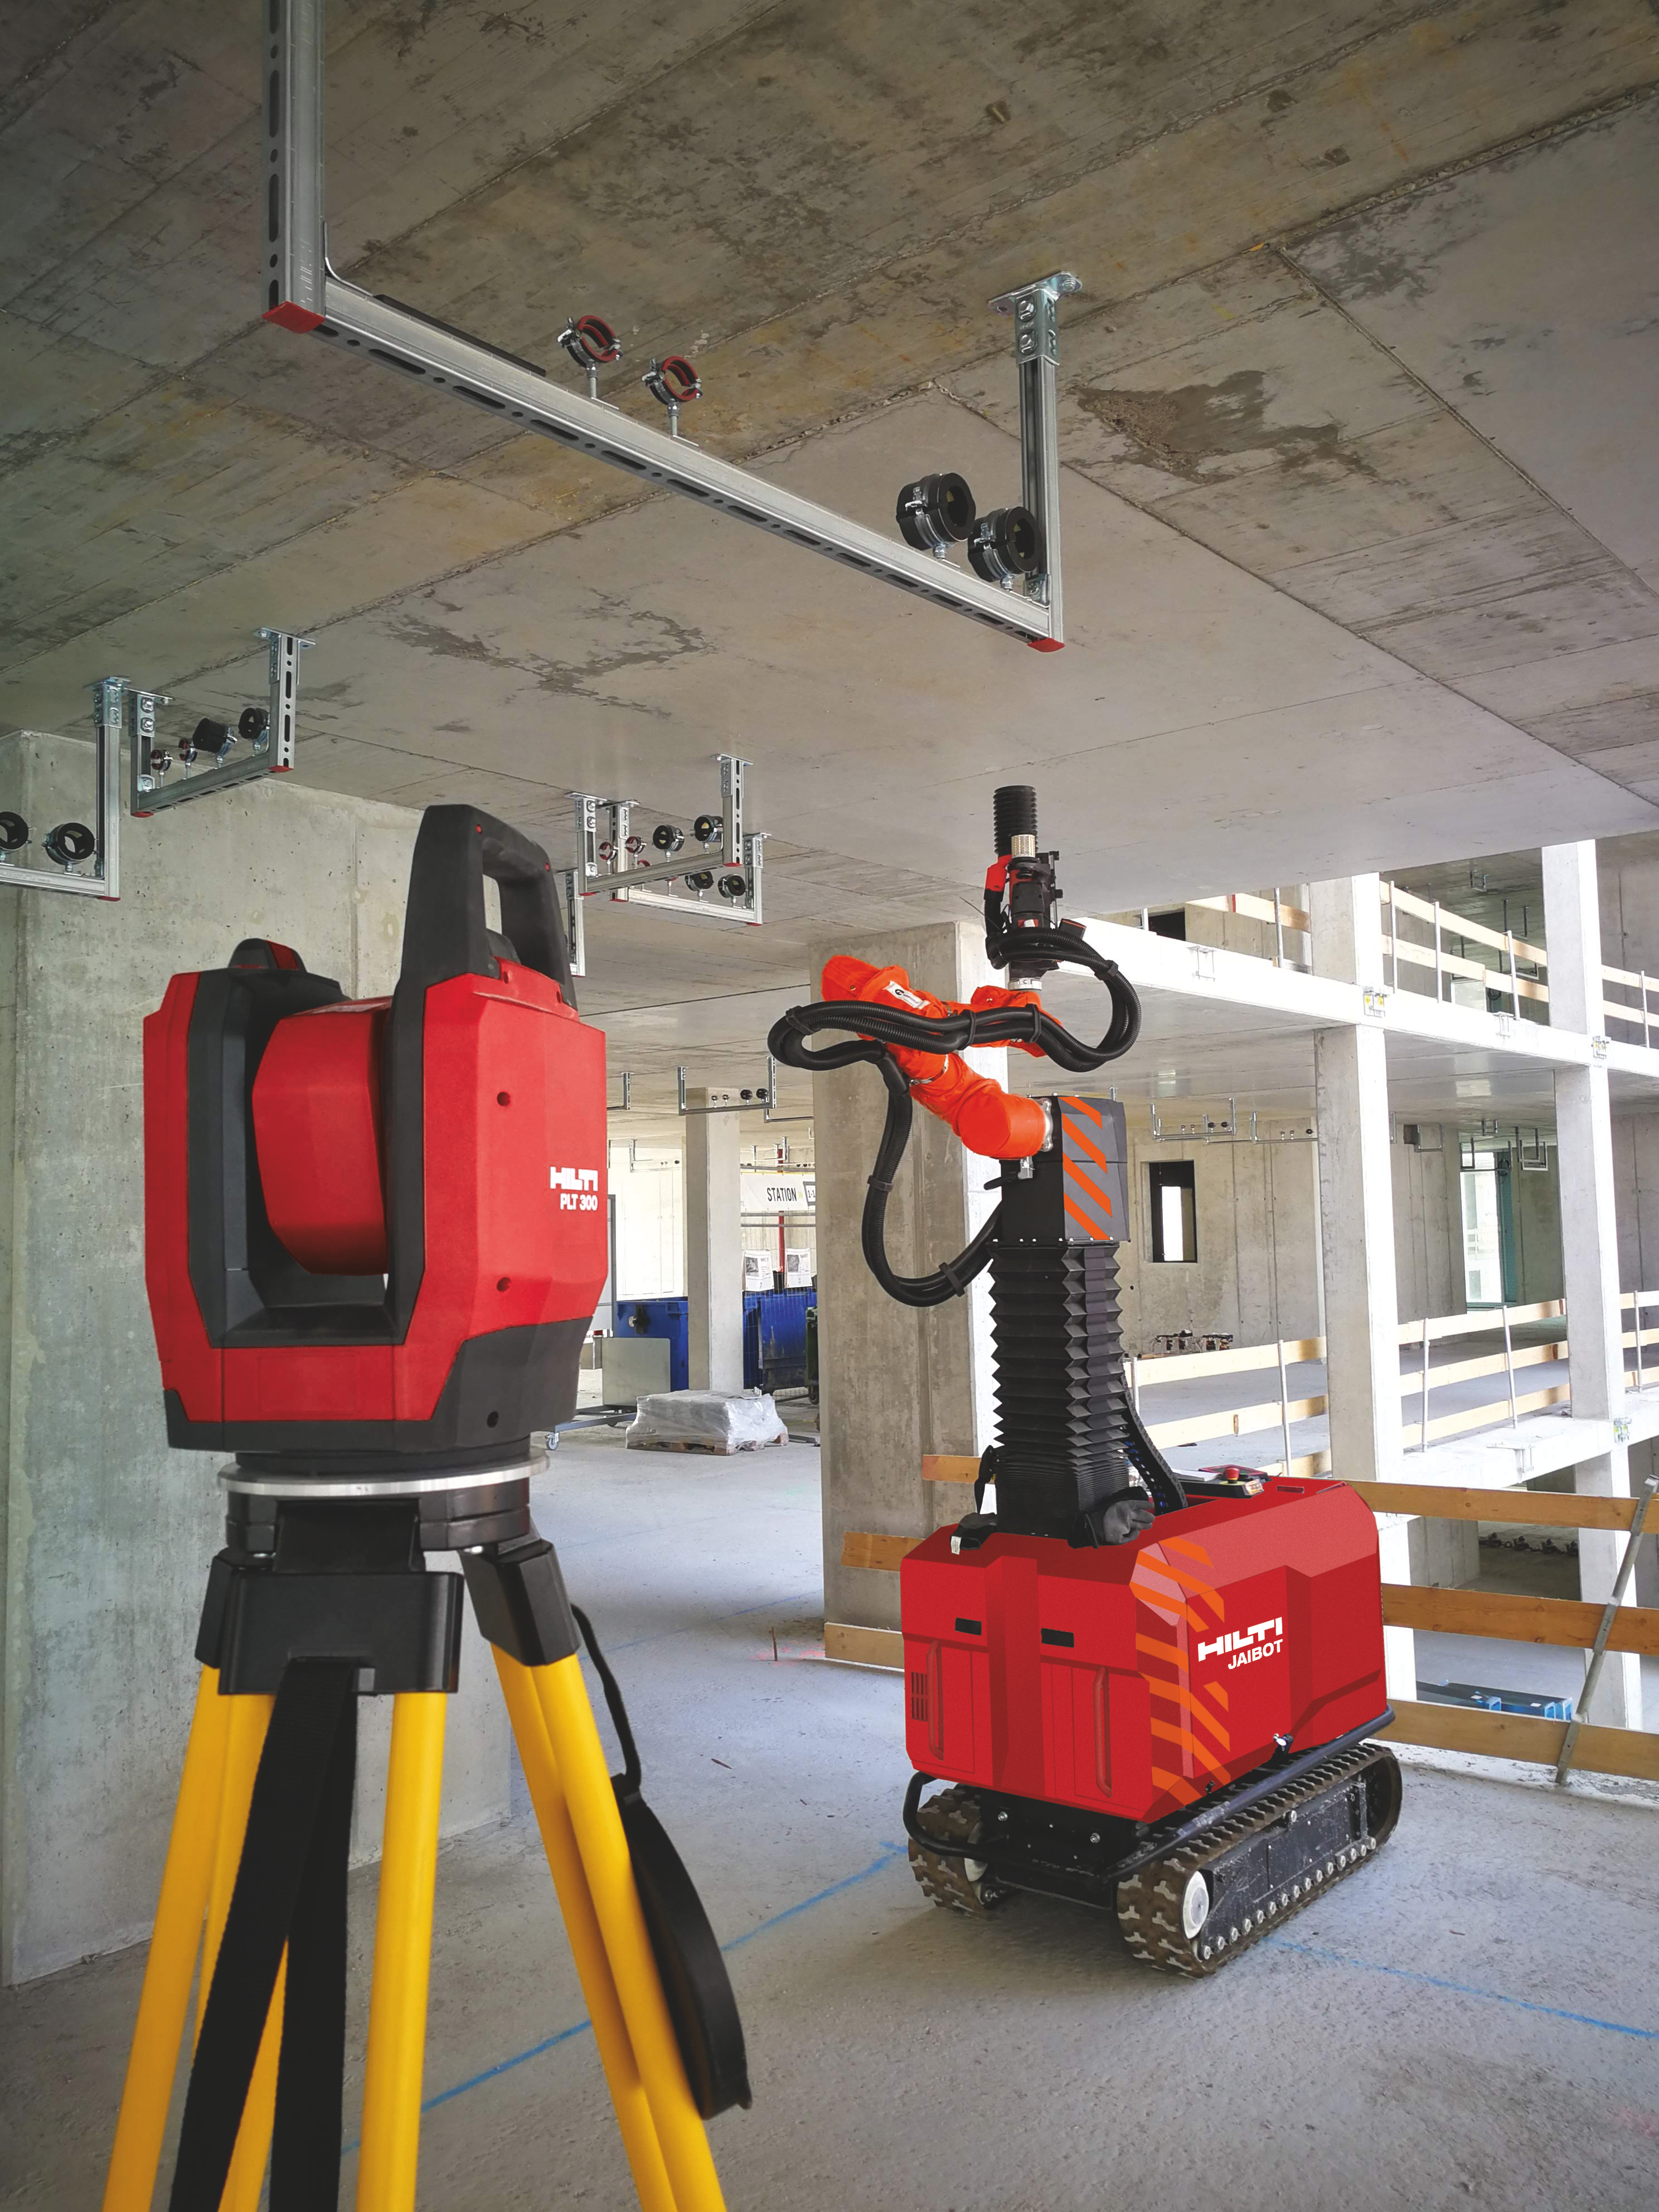 Hilti PLT 300 total station and Jaibot drilling robot on a construction site performing MEP installation.